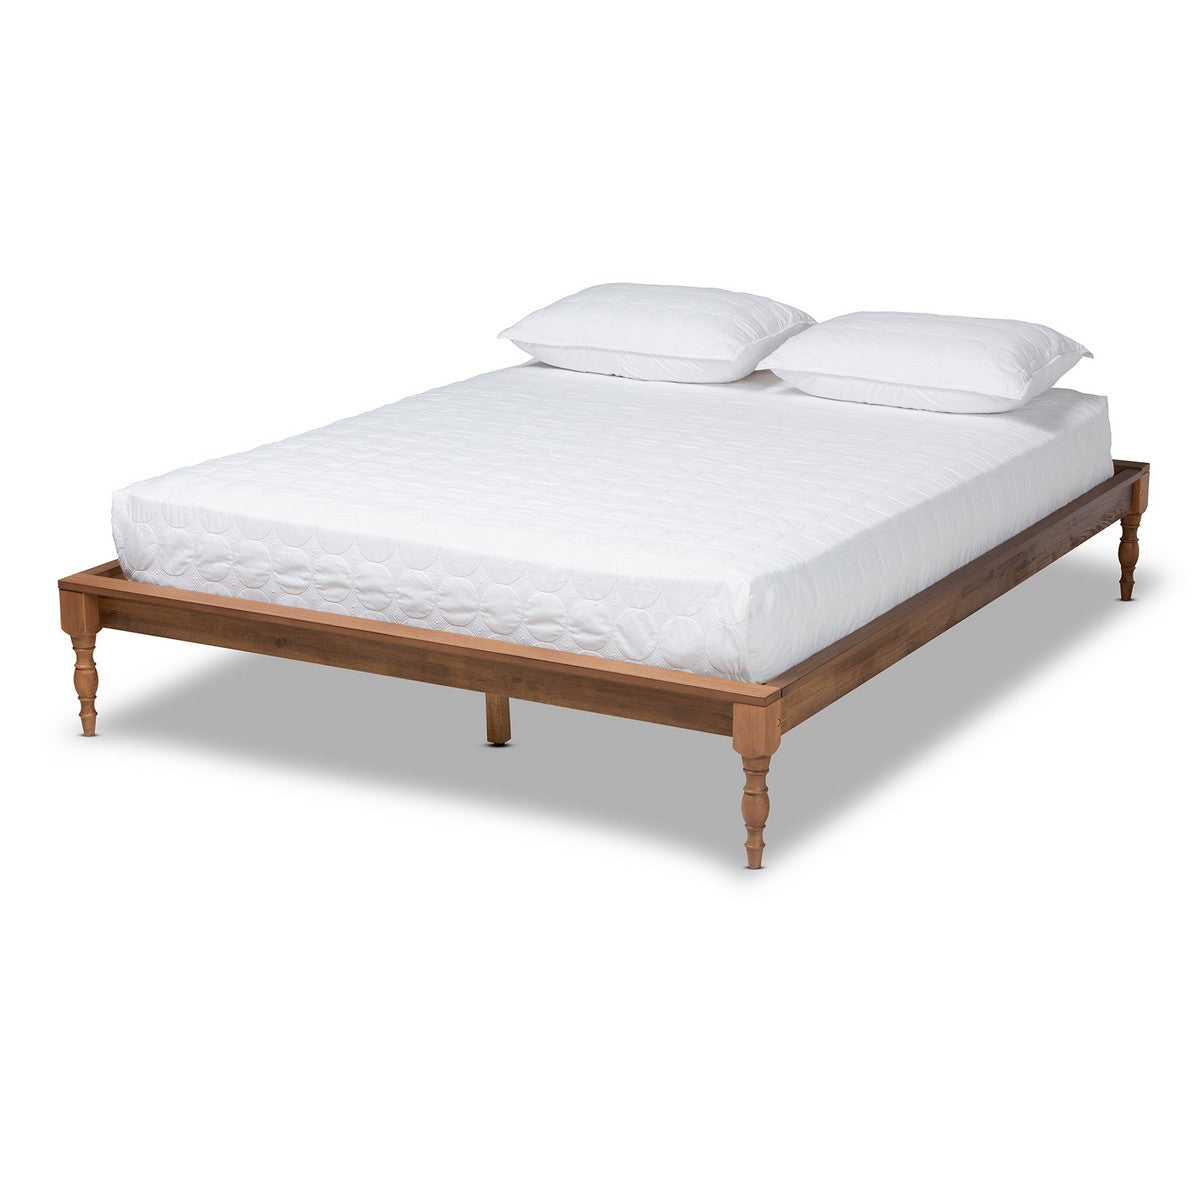 Baxton Studio Romy Vintage French Inspired Ash Wanut Finished Queen Size Wood Bed Frame Baxton Studio- Bed Frames-Minimal And Modern - 1